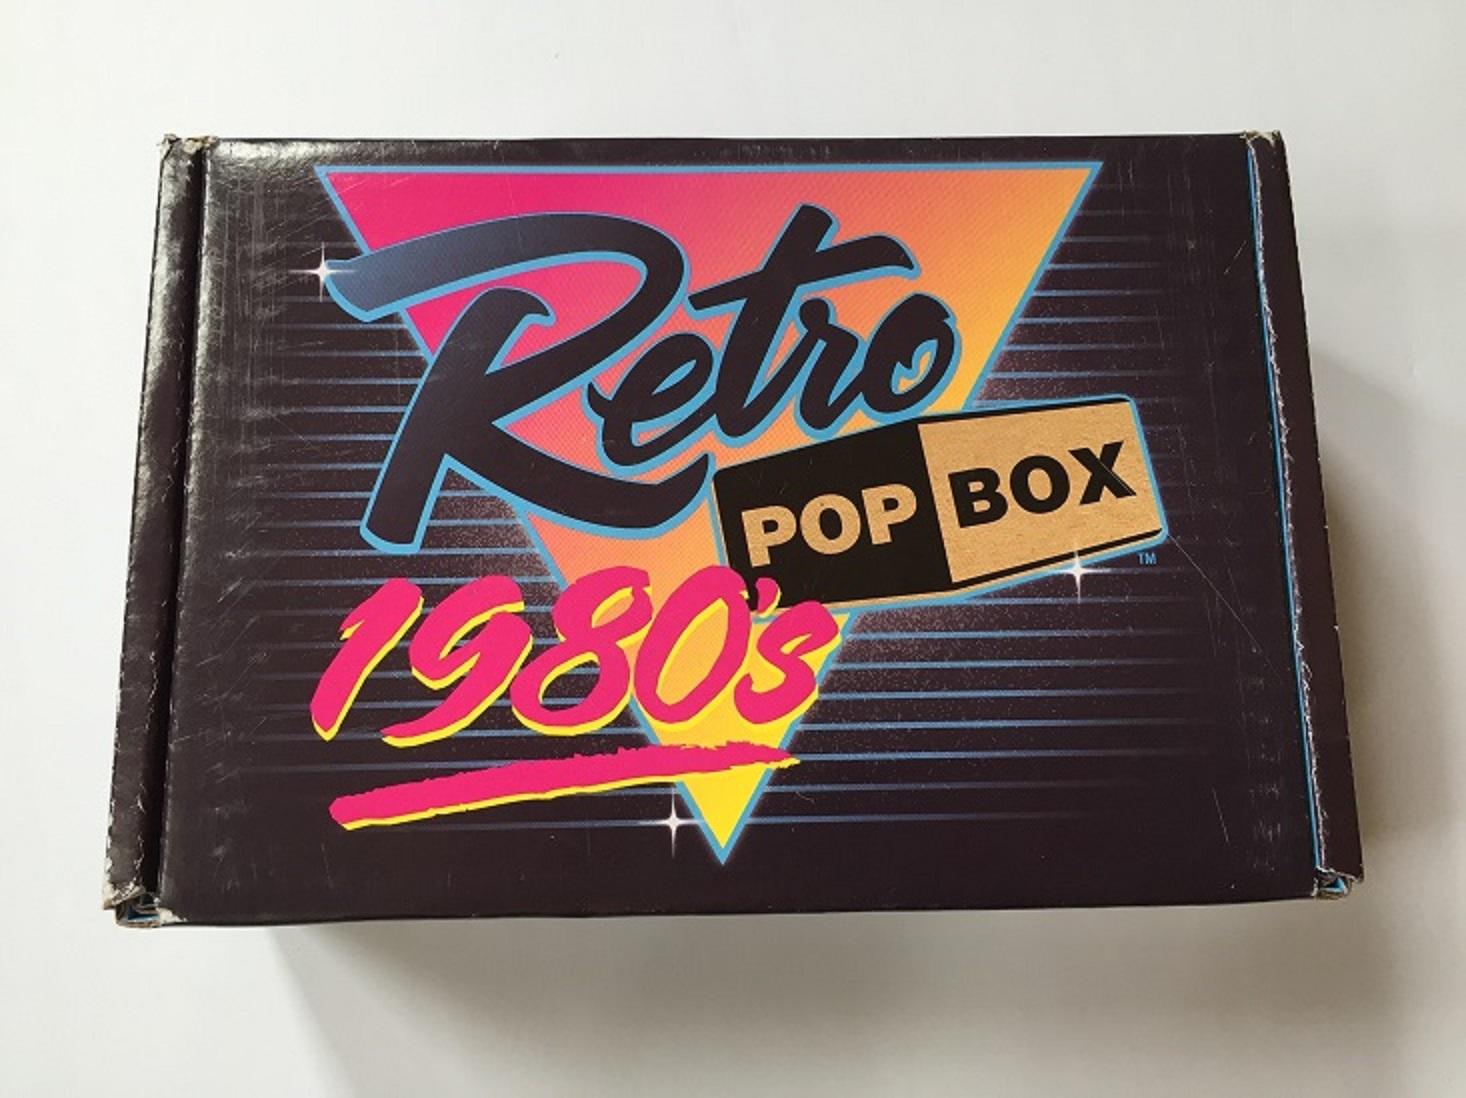 80s Retro Pop Box Subscription Review + Coupon- October 2016